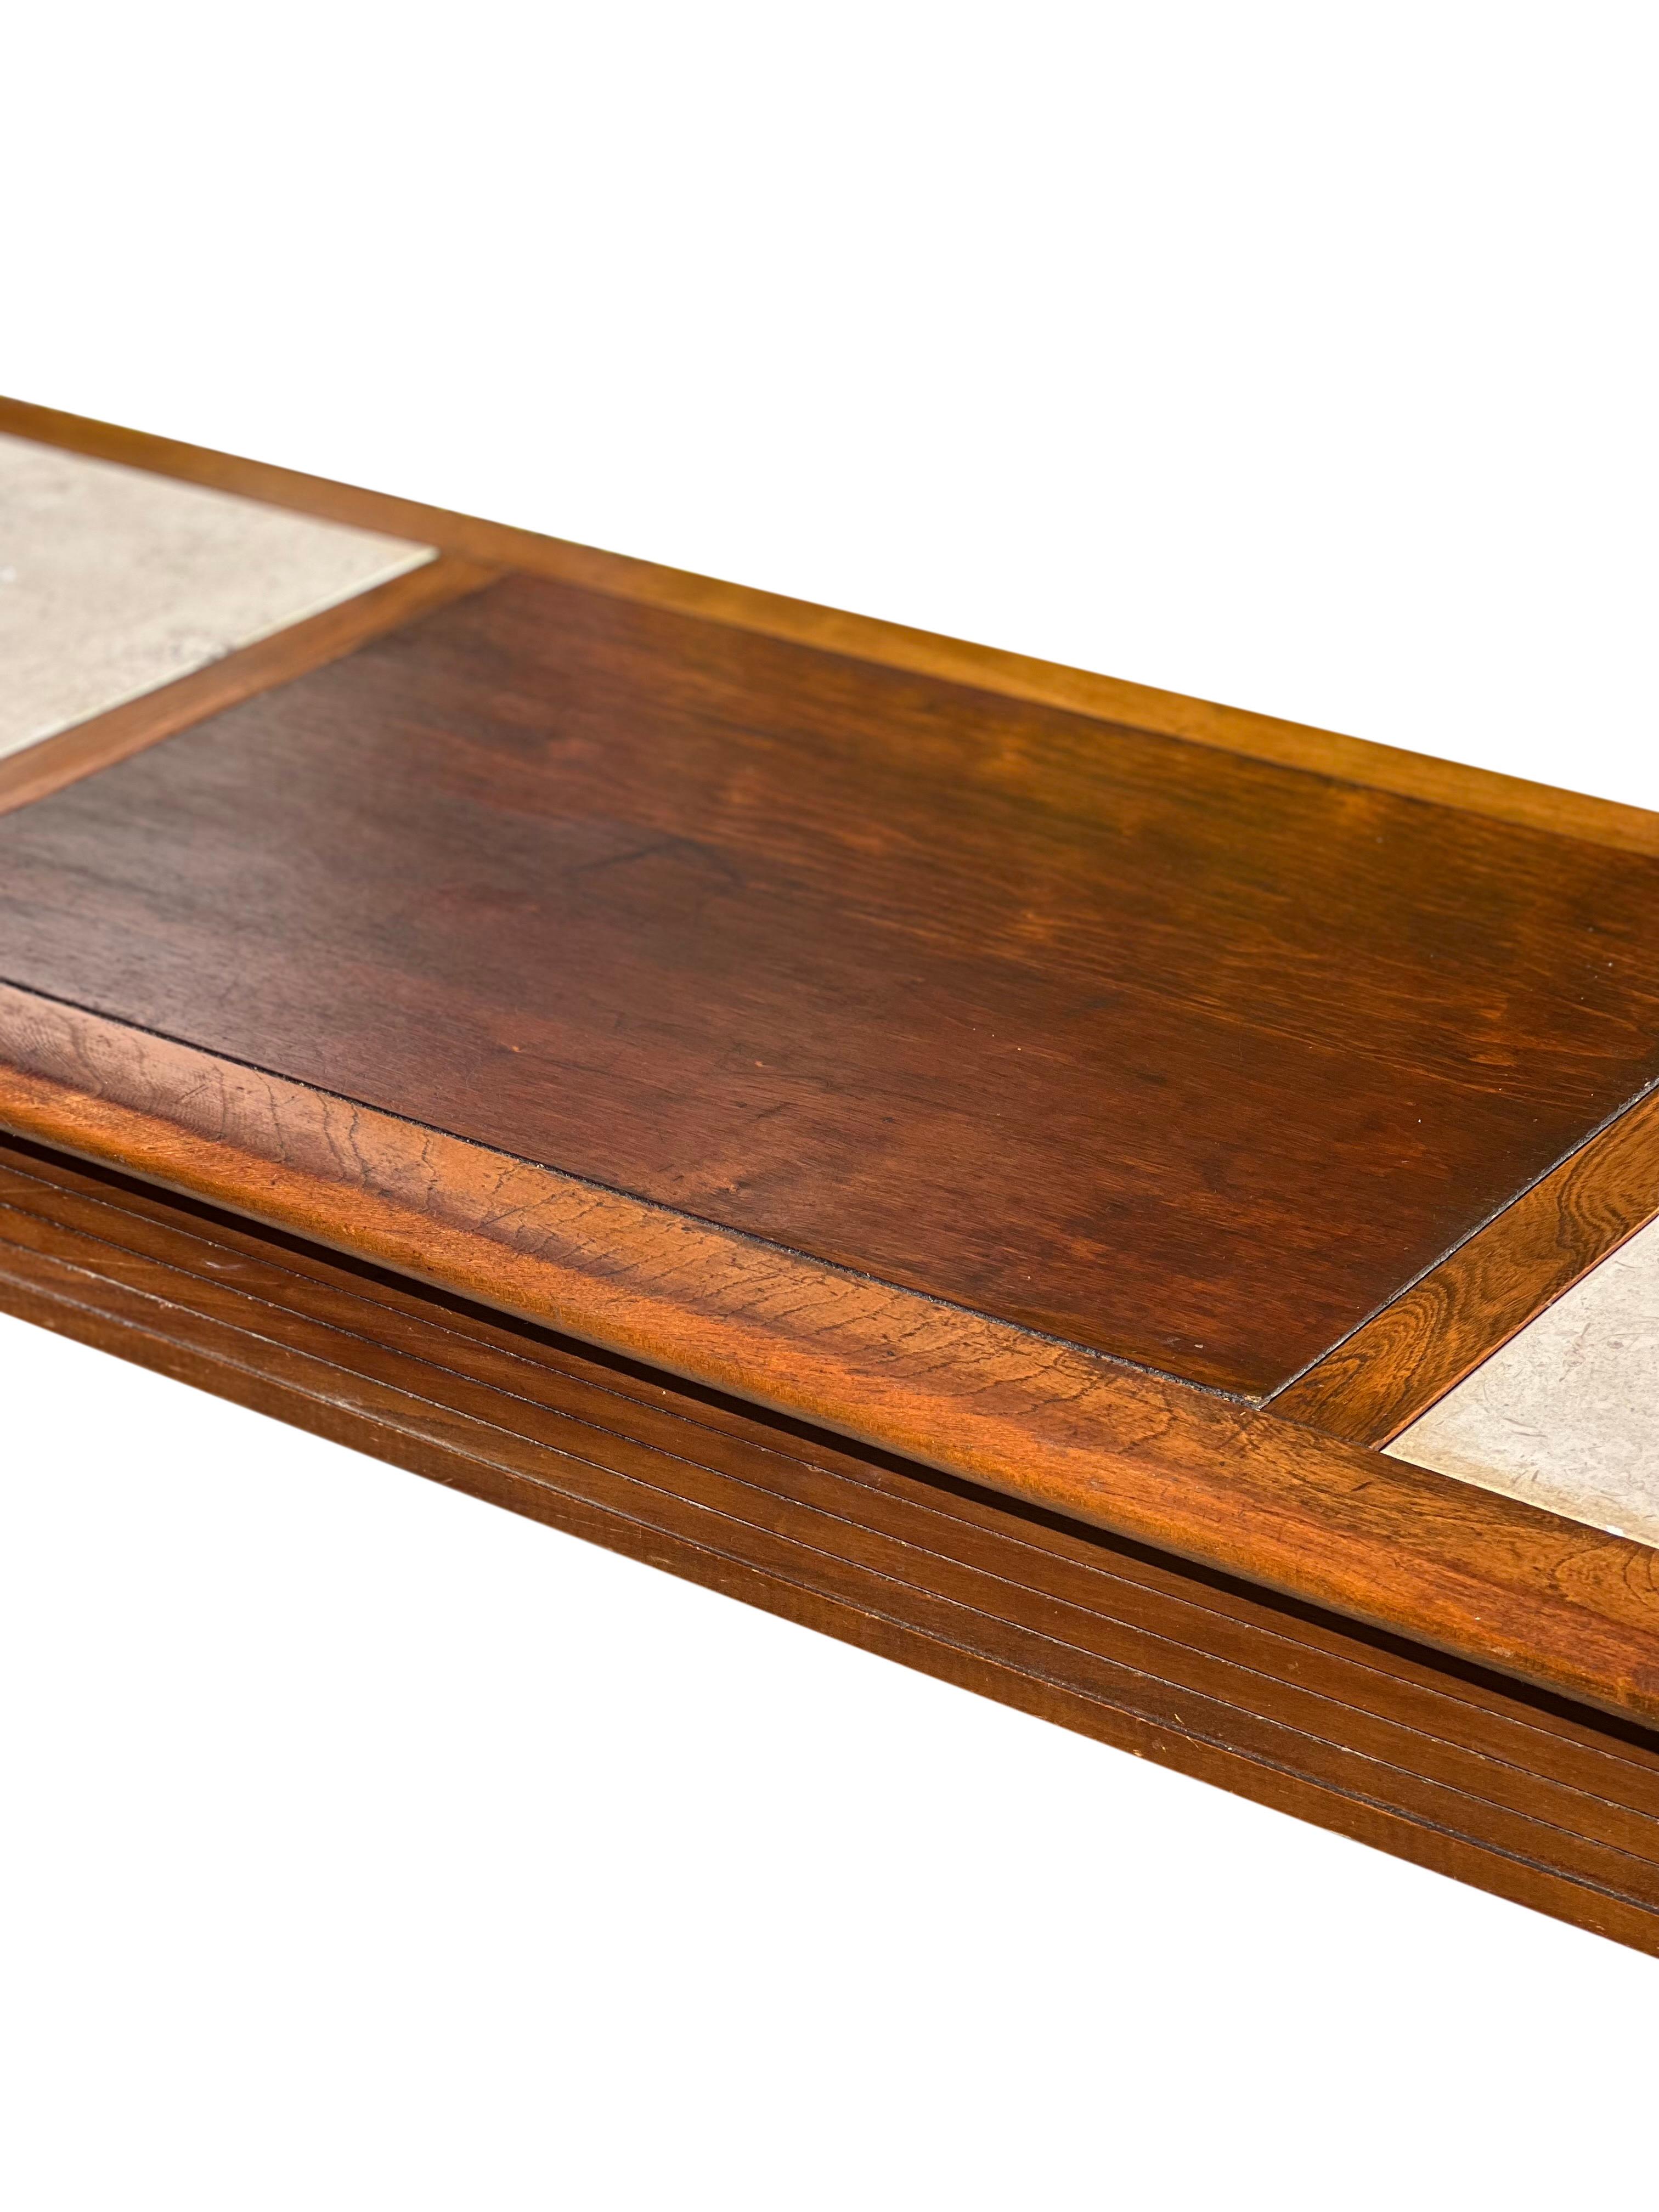 20th Century Mid Century Lane Style Walnut Coffee Table with Travertine Inserts For Sale